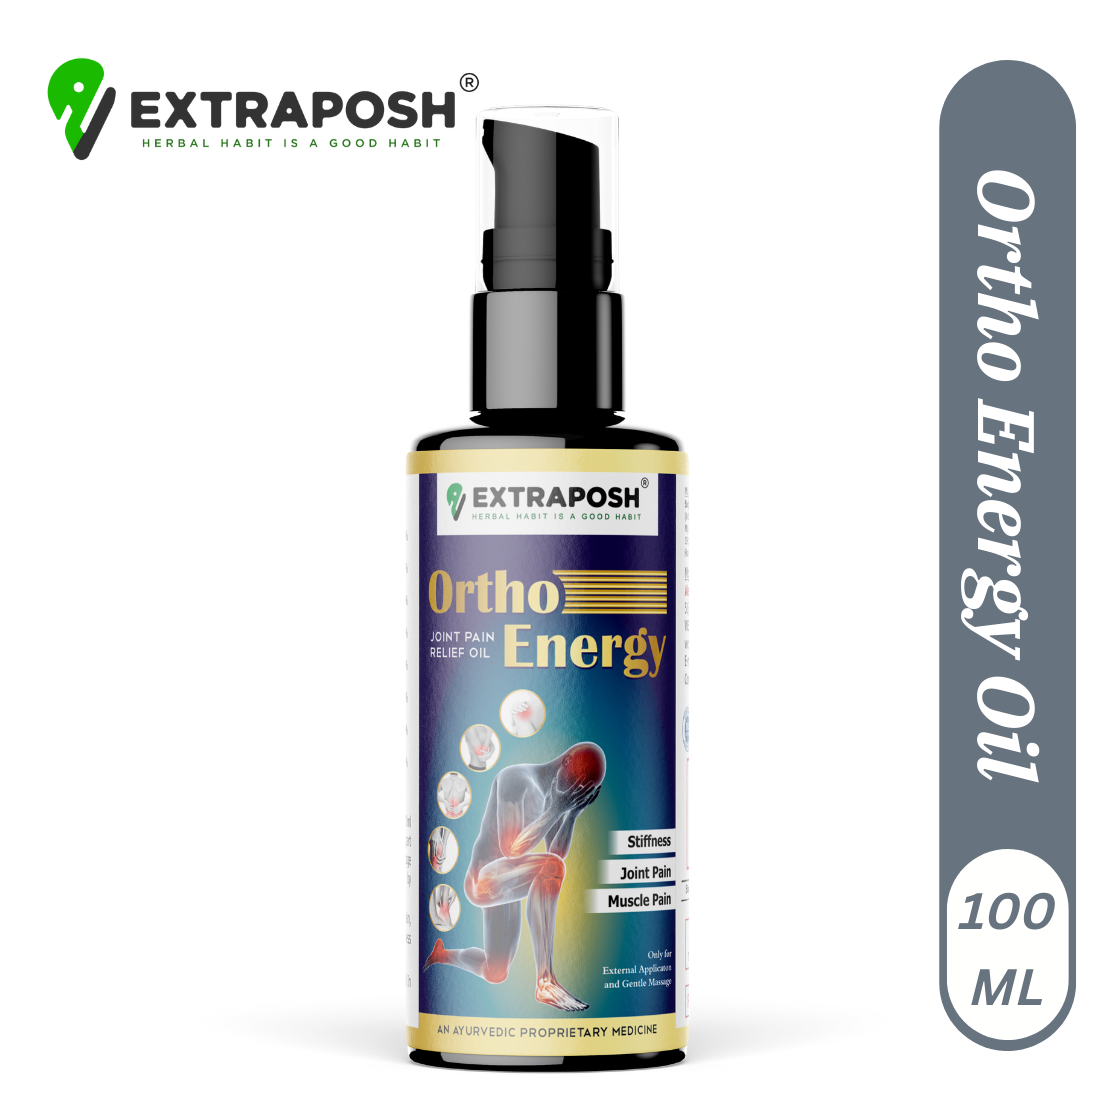 HERBAL MUSCLE PAIN RELIEF ORTHO ENERGY OIL